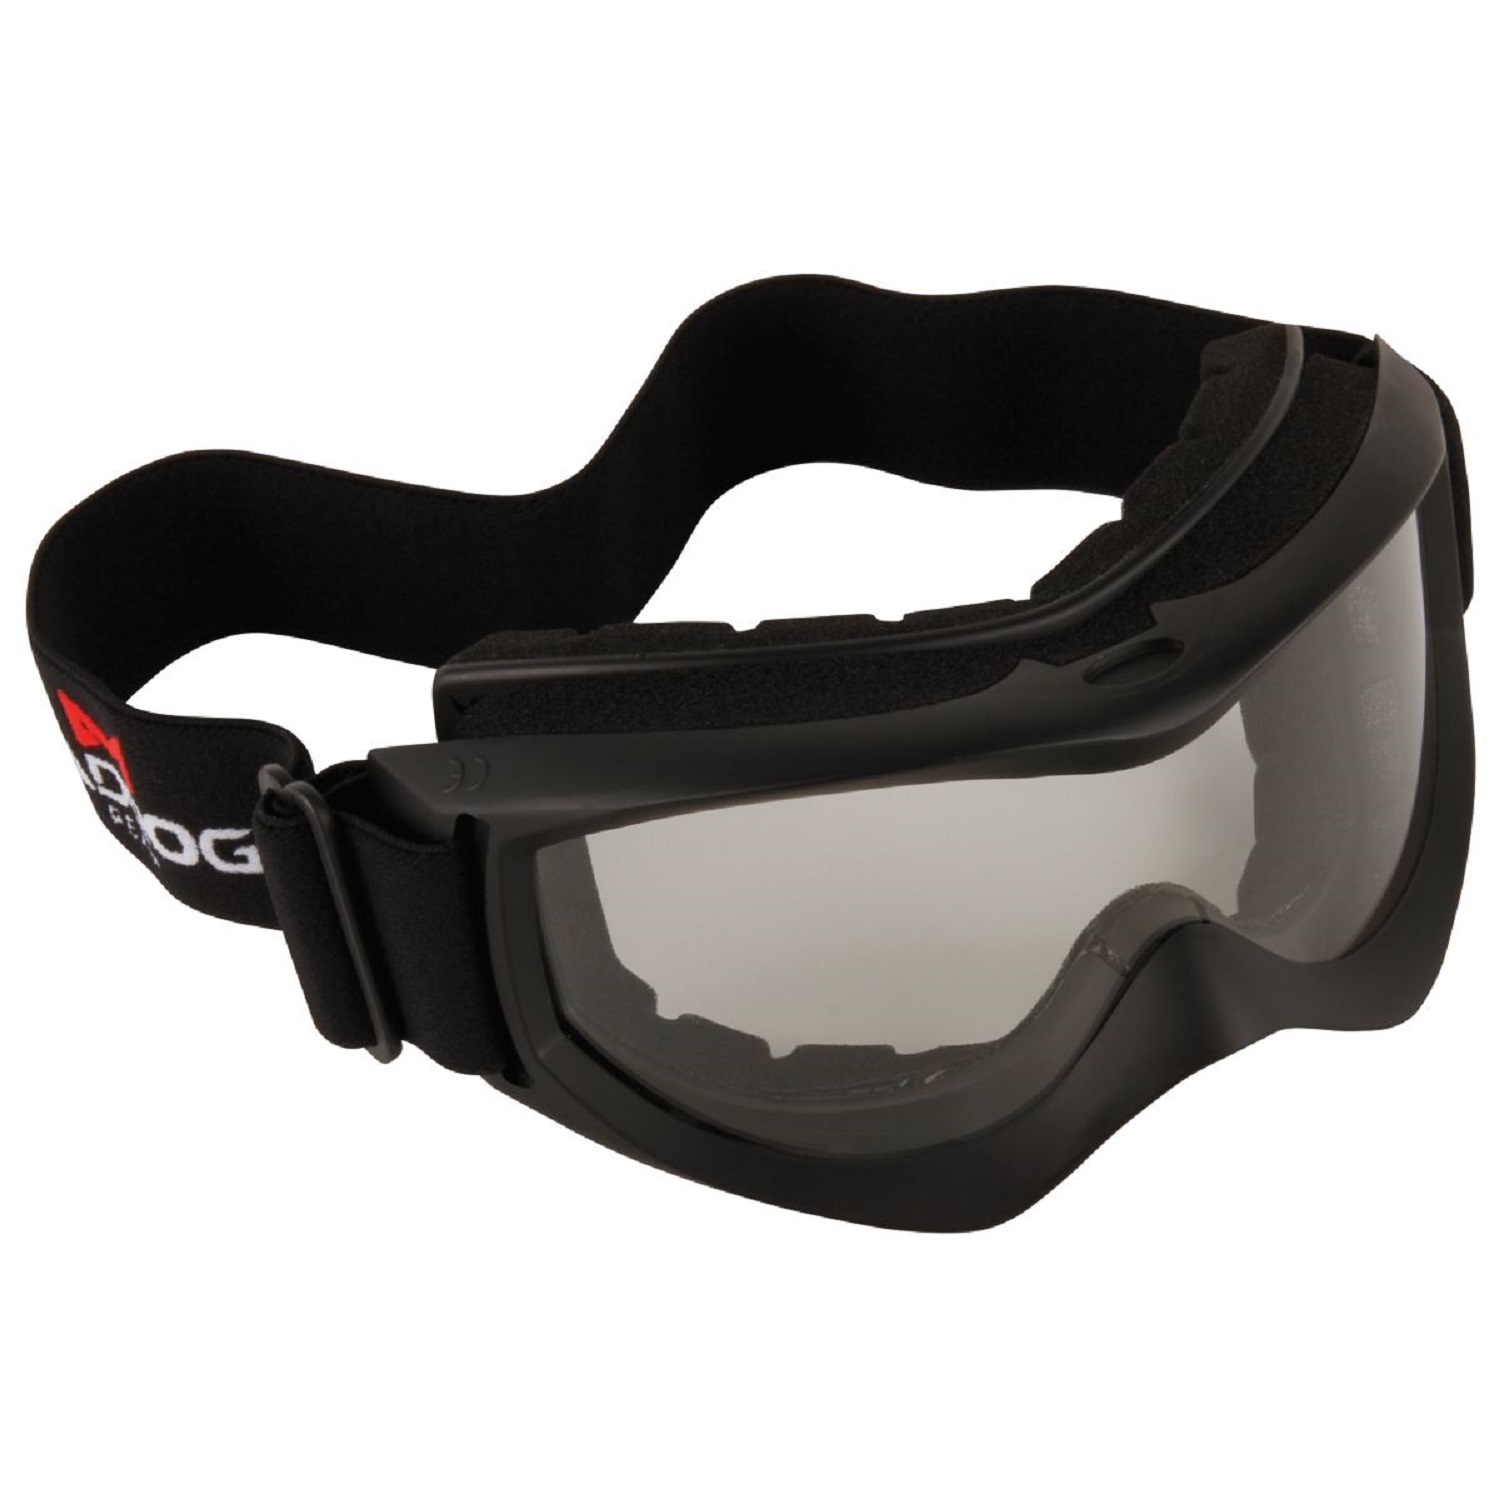 Coleman® All-Terrain Vehicle Adjustable Protective Goggles, Black - image 1 of 4